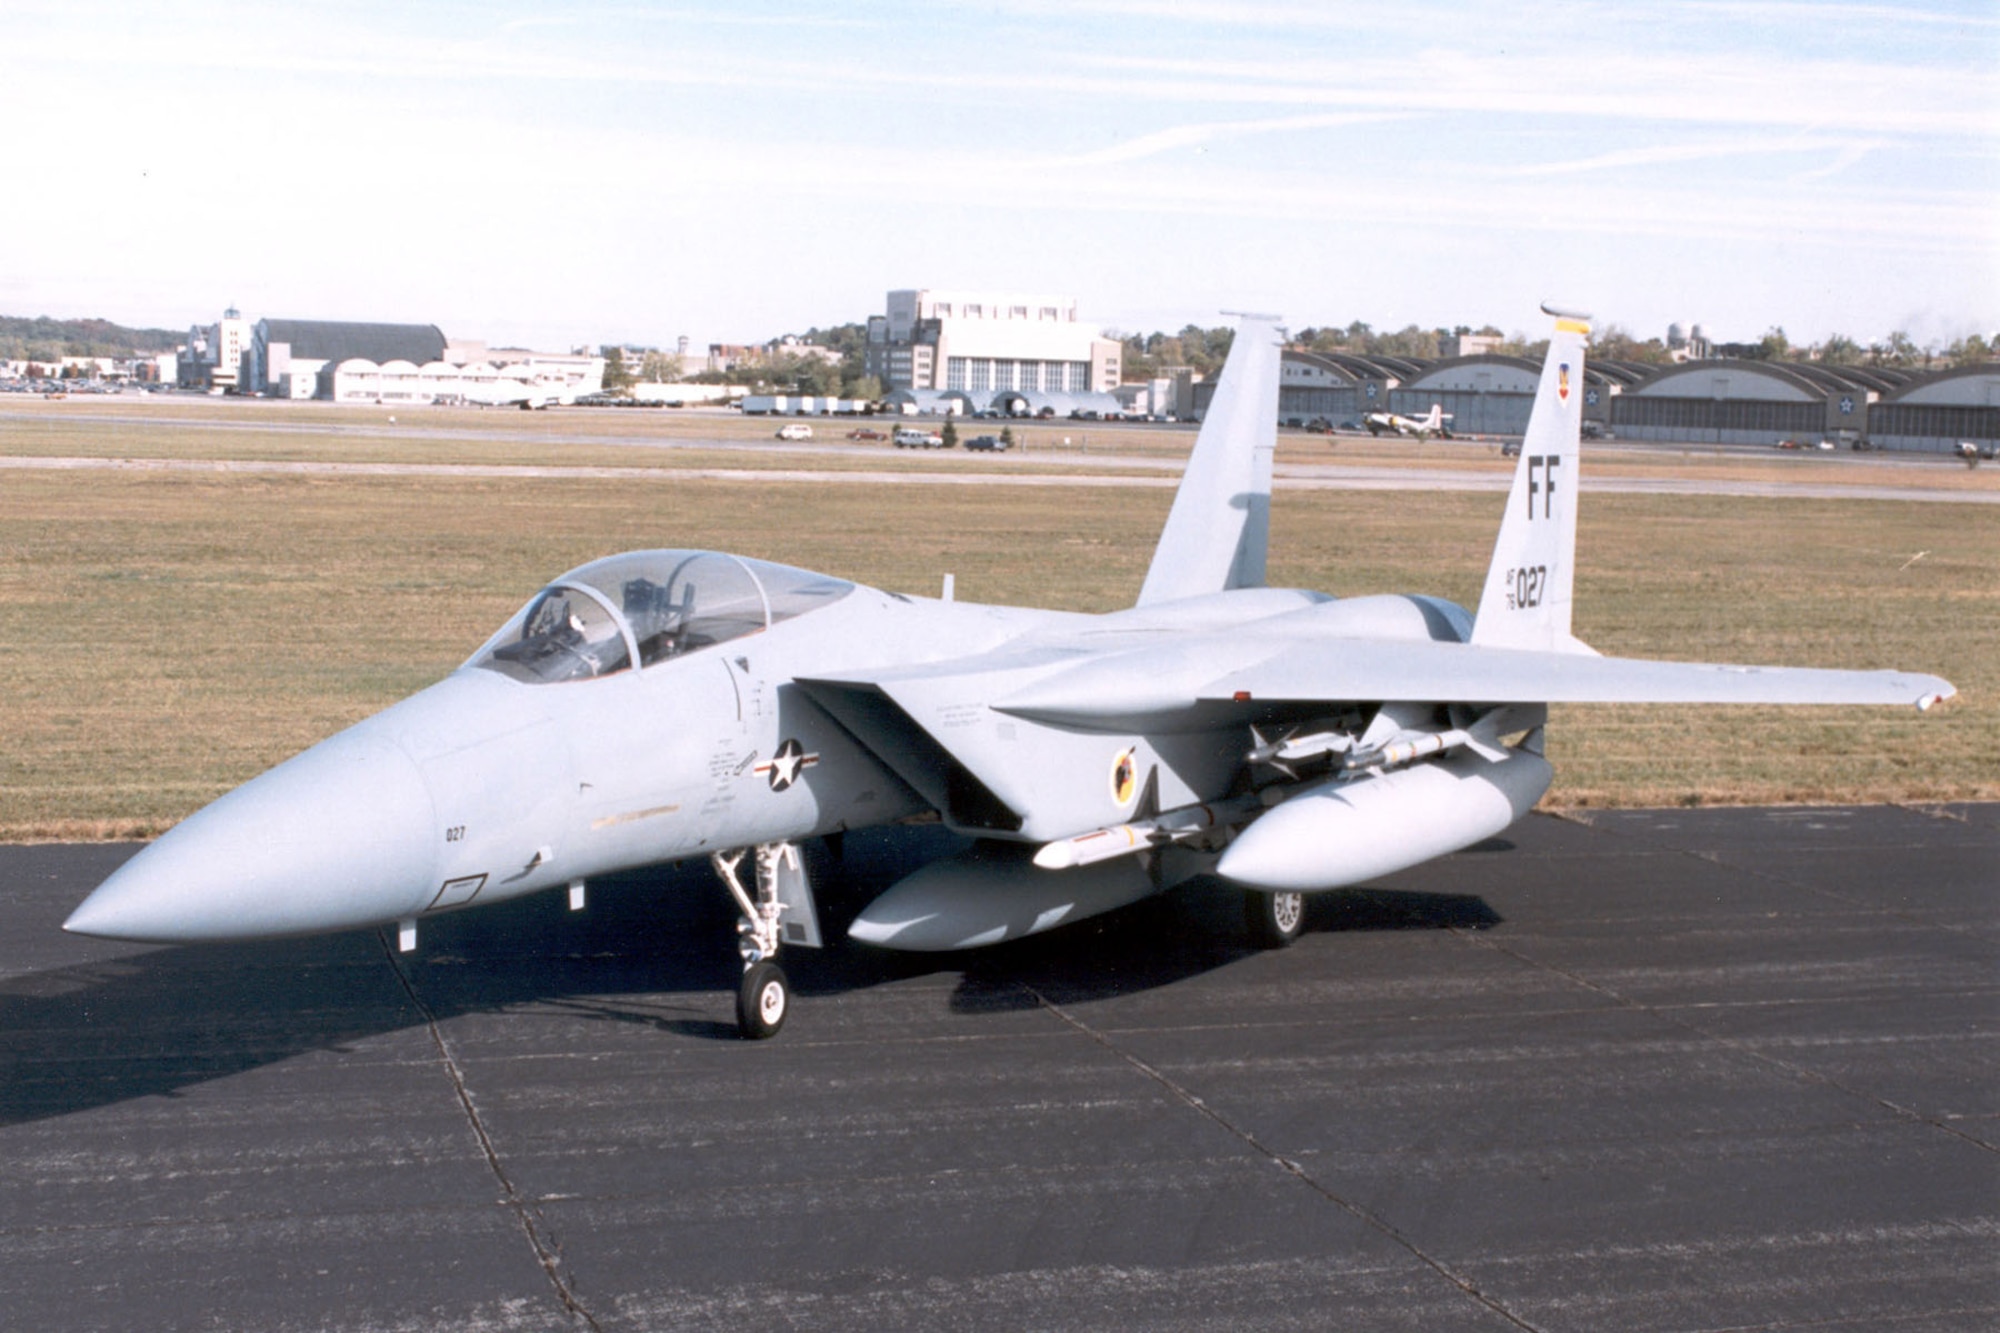 DAYTON, Ohio -- McDonnell Douglas F-15A at the National Museum of the United States Air Force. (U.S. Air Force photo)